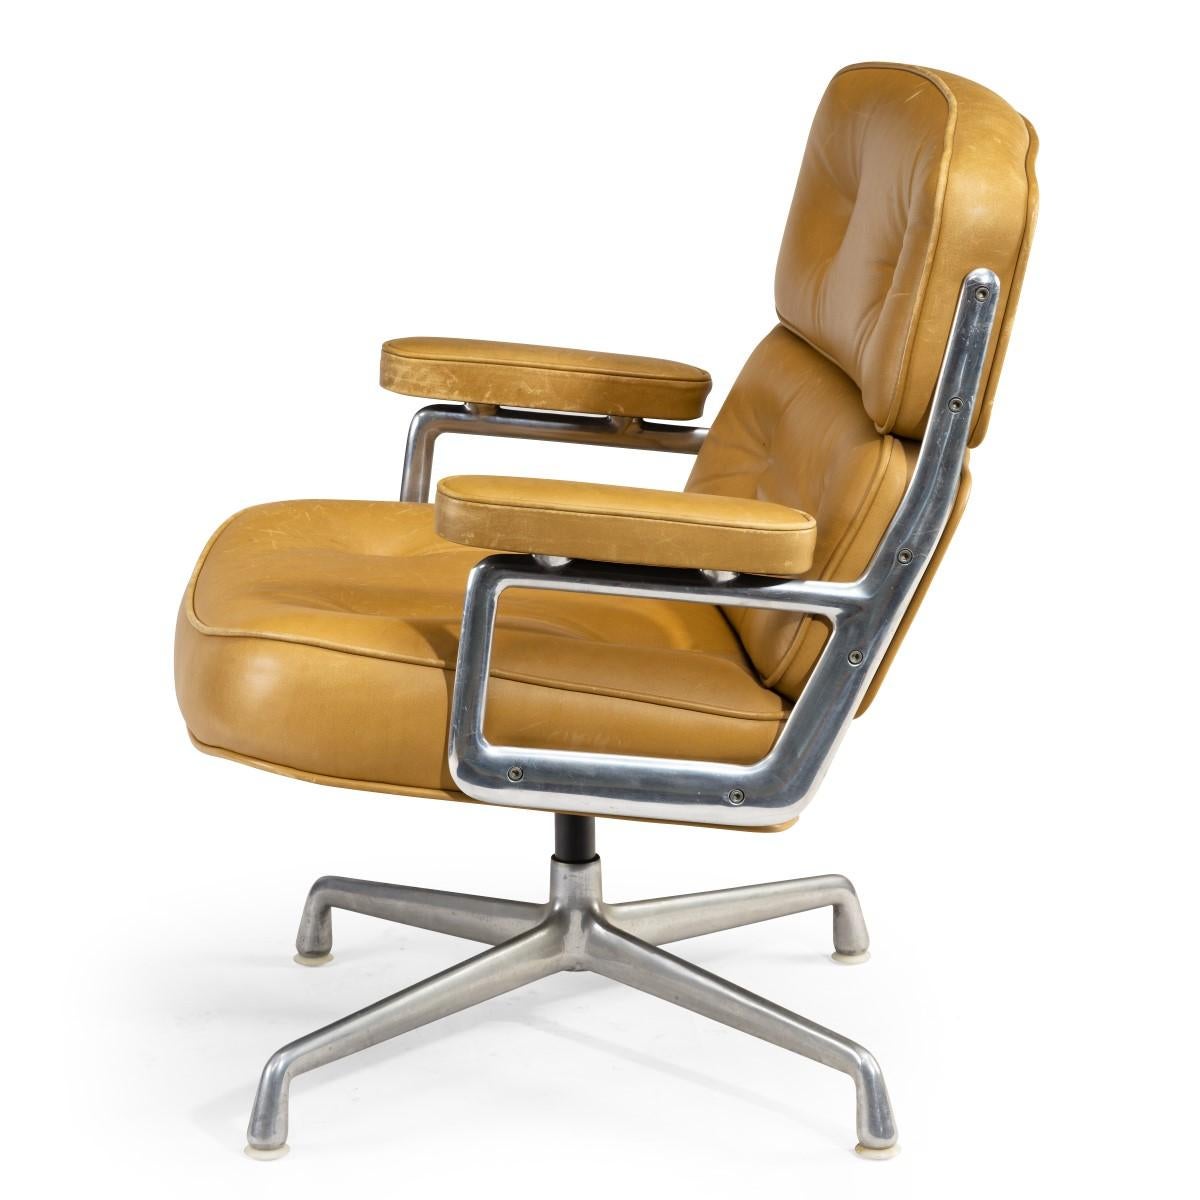 Late 20th Century A pair of swivel “Time Life Chairs” designed by Charles & Ray Eames for Herman M